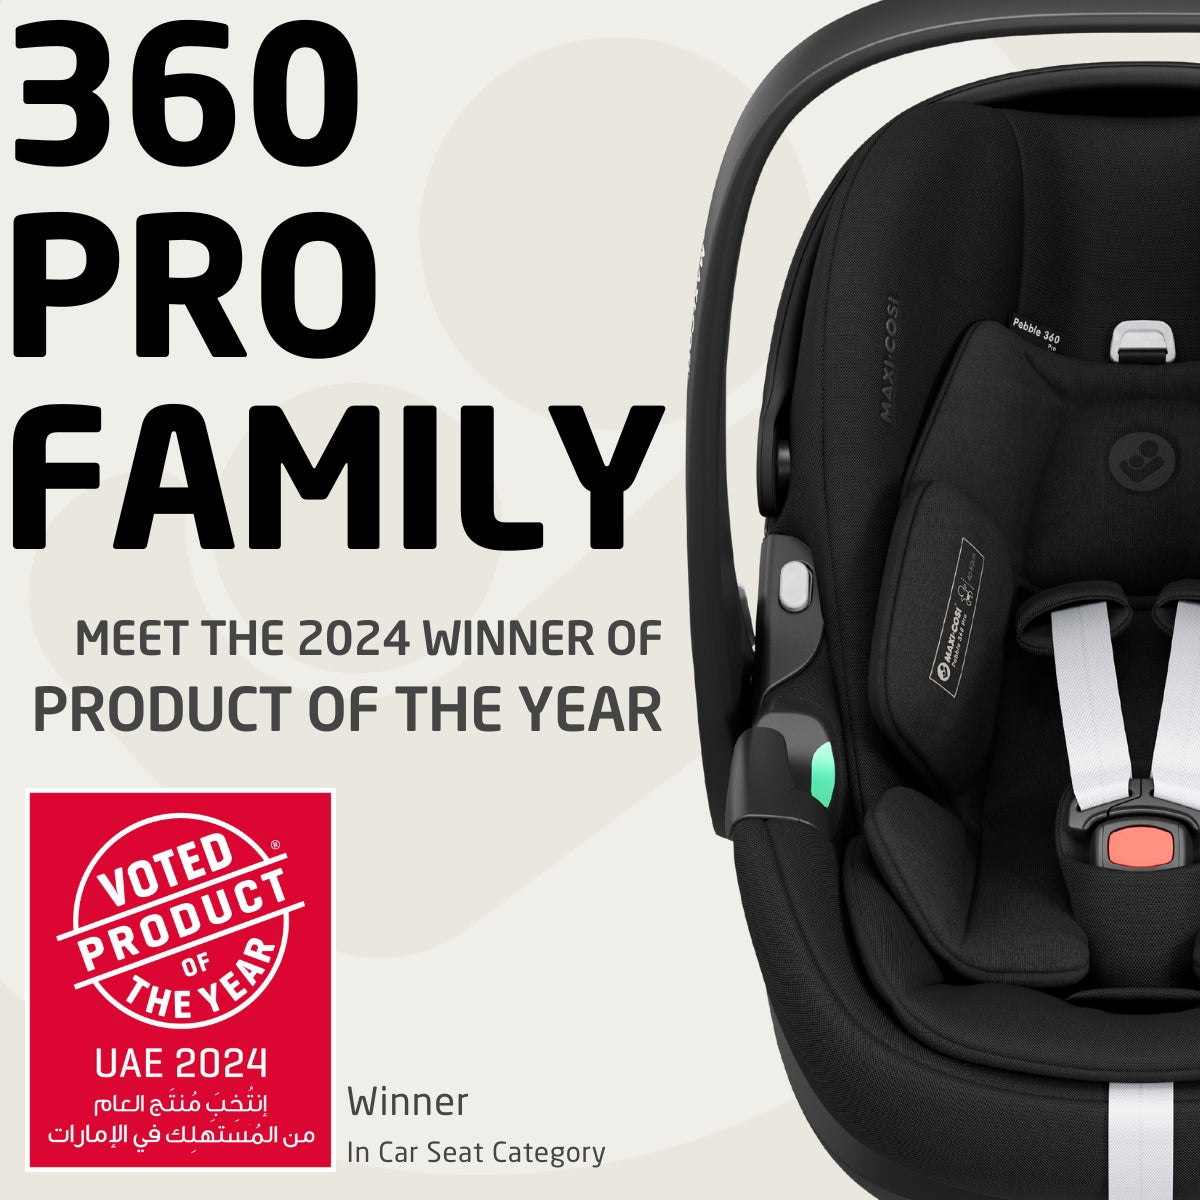 Maxi-Cosi UAE's Mobile Banner for 360 Pro Family